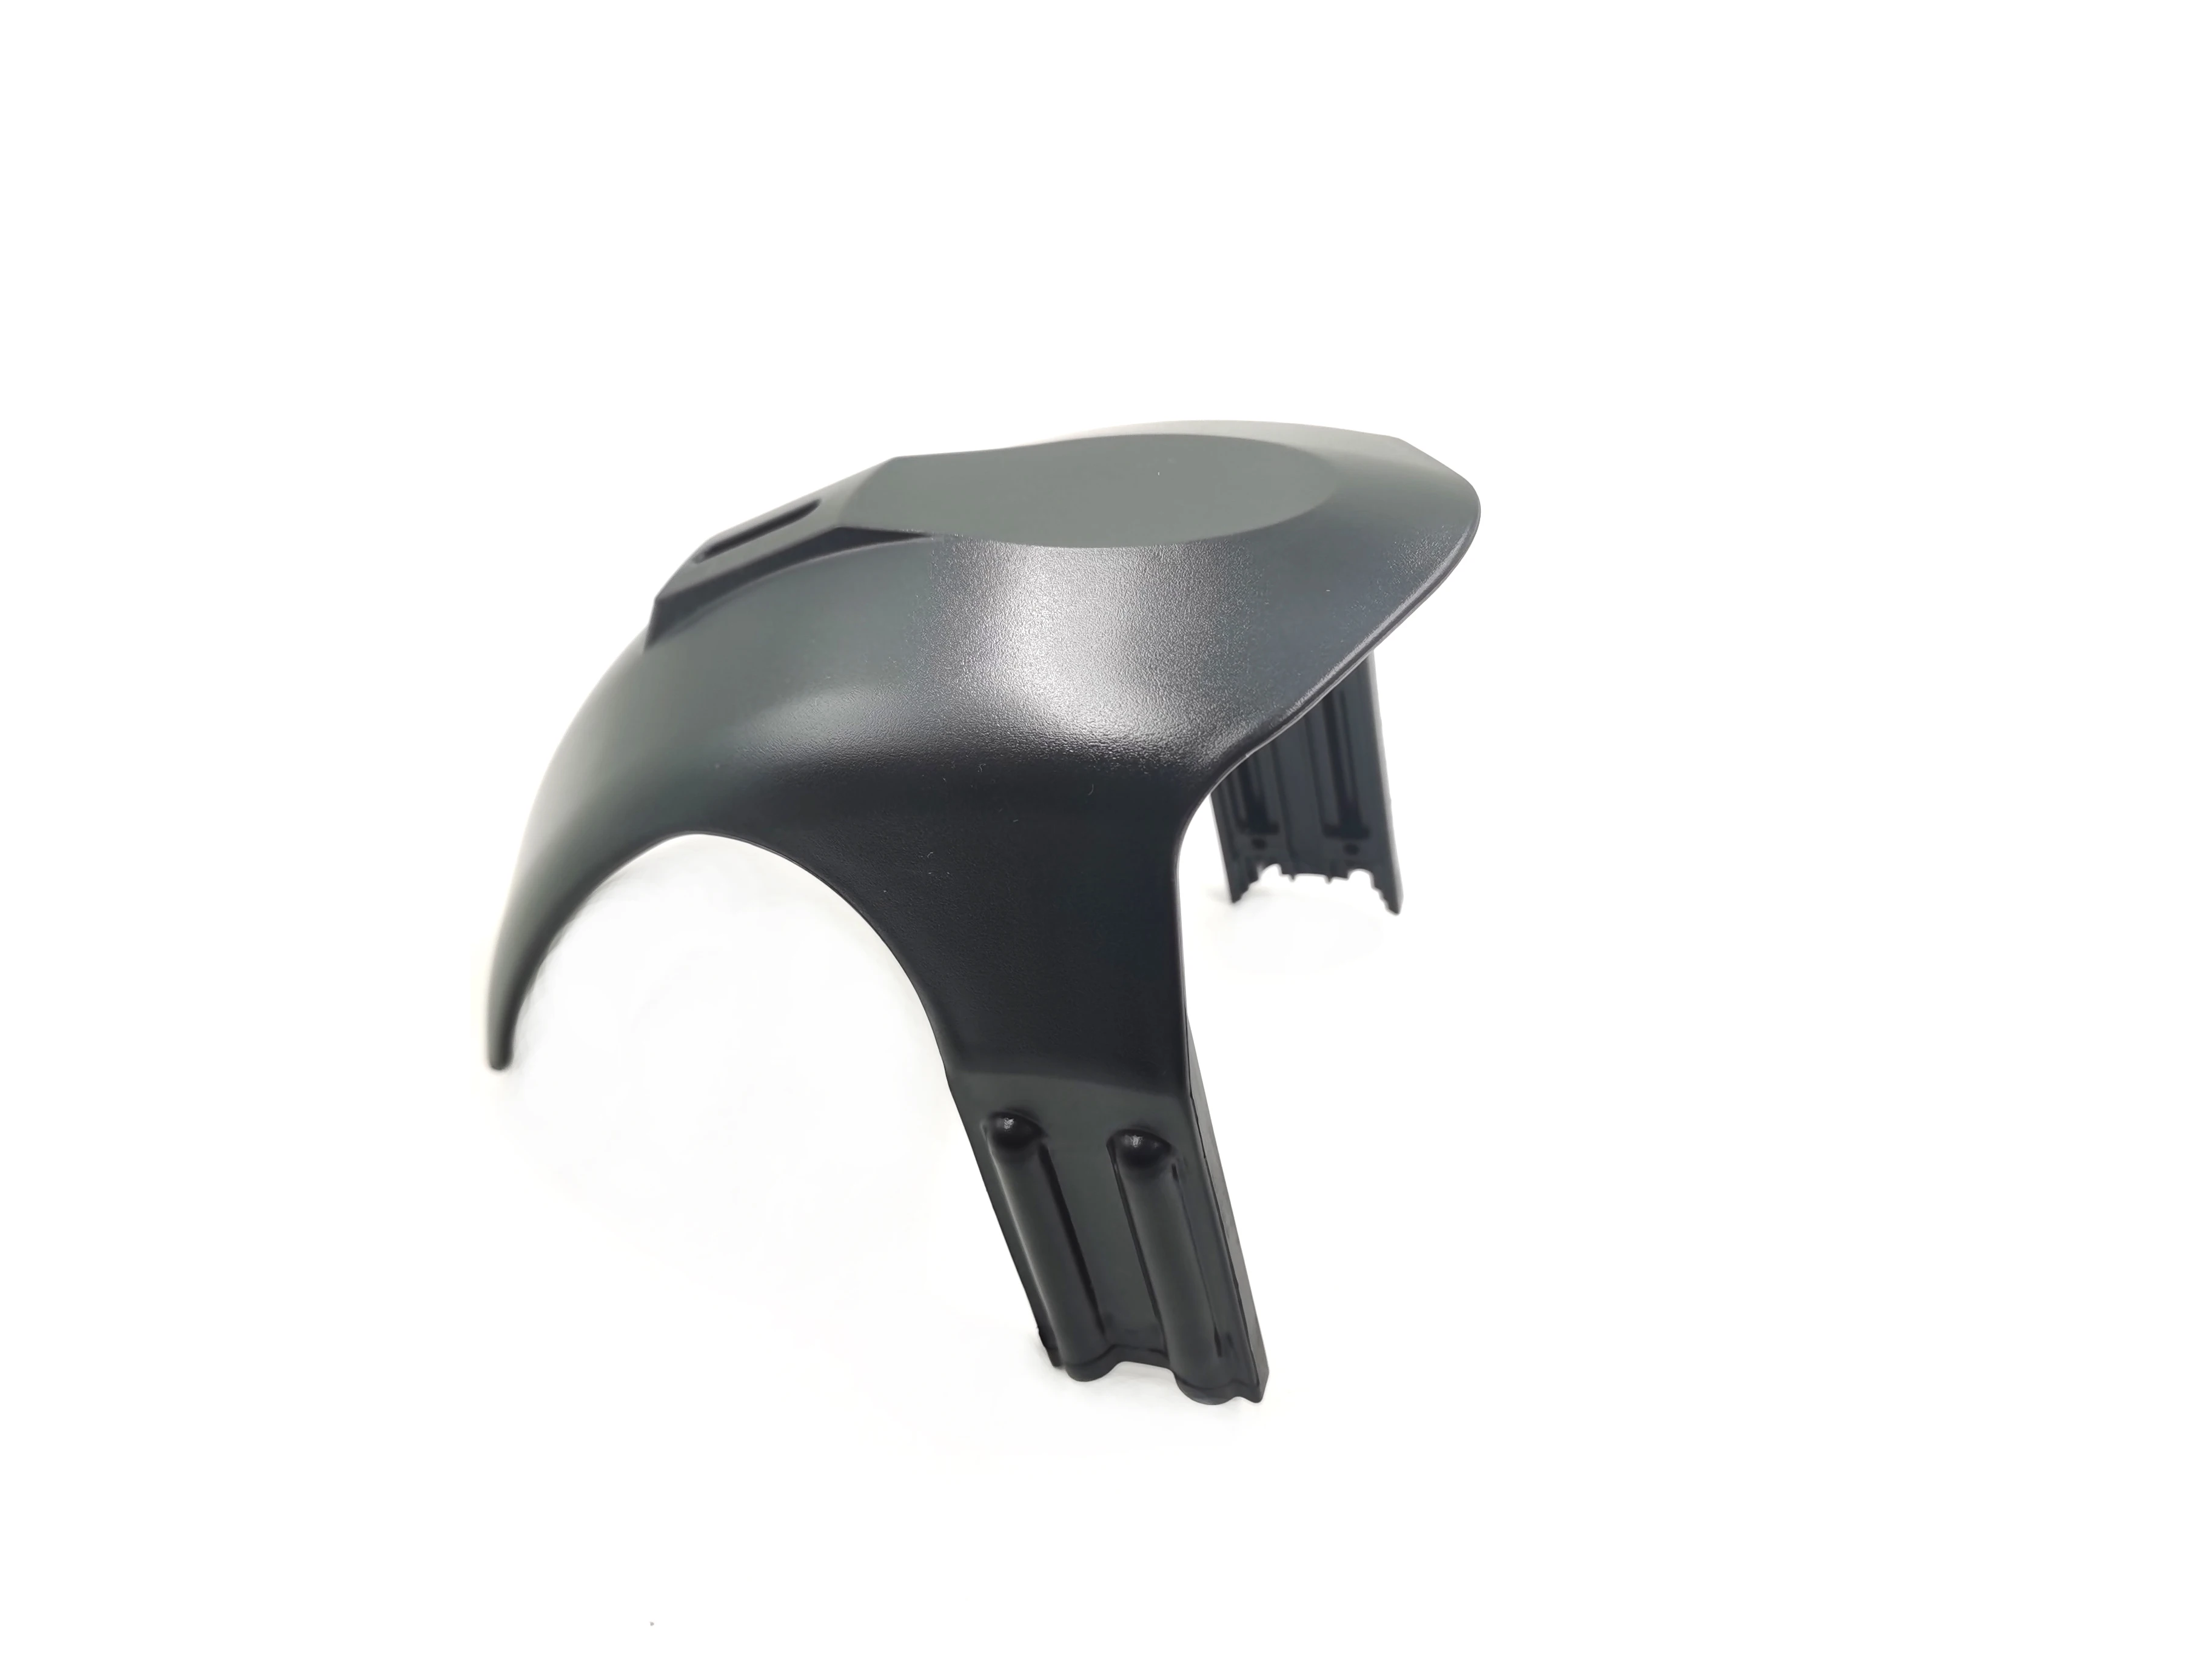 Original G2 PRO Rear Fender Back Mudguard for KUGOO G2 PRO Electric Scooter Kickscooter Fender Accessories Parts